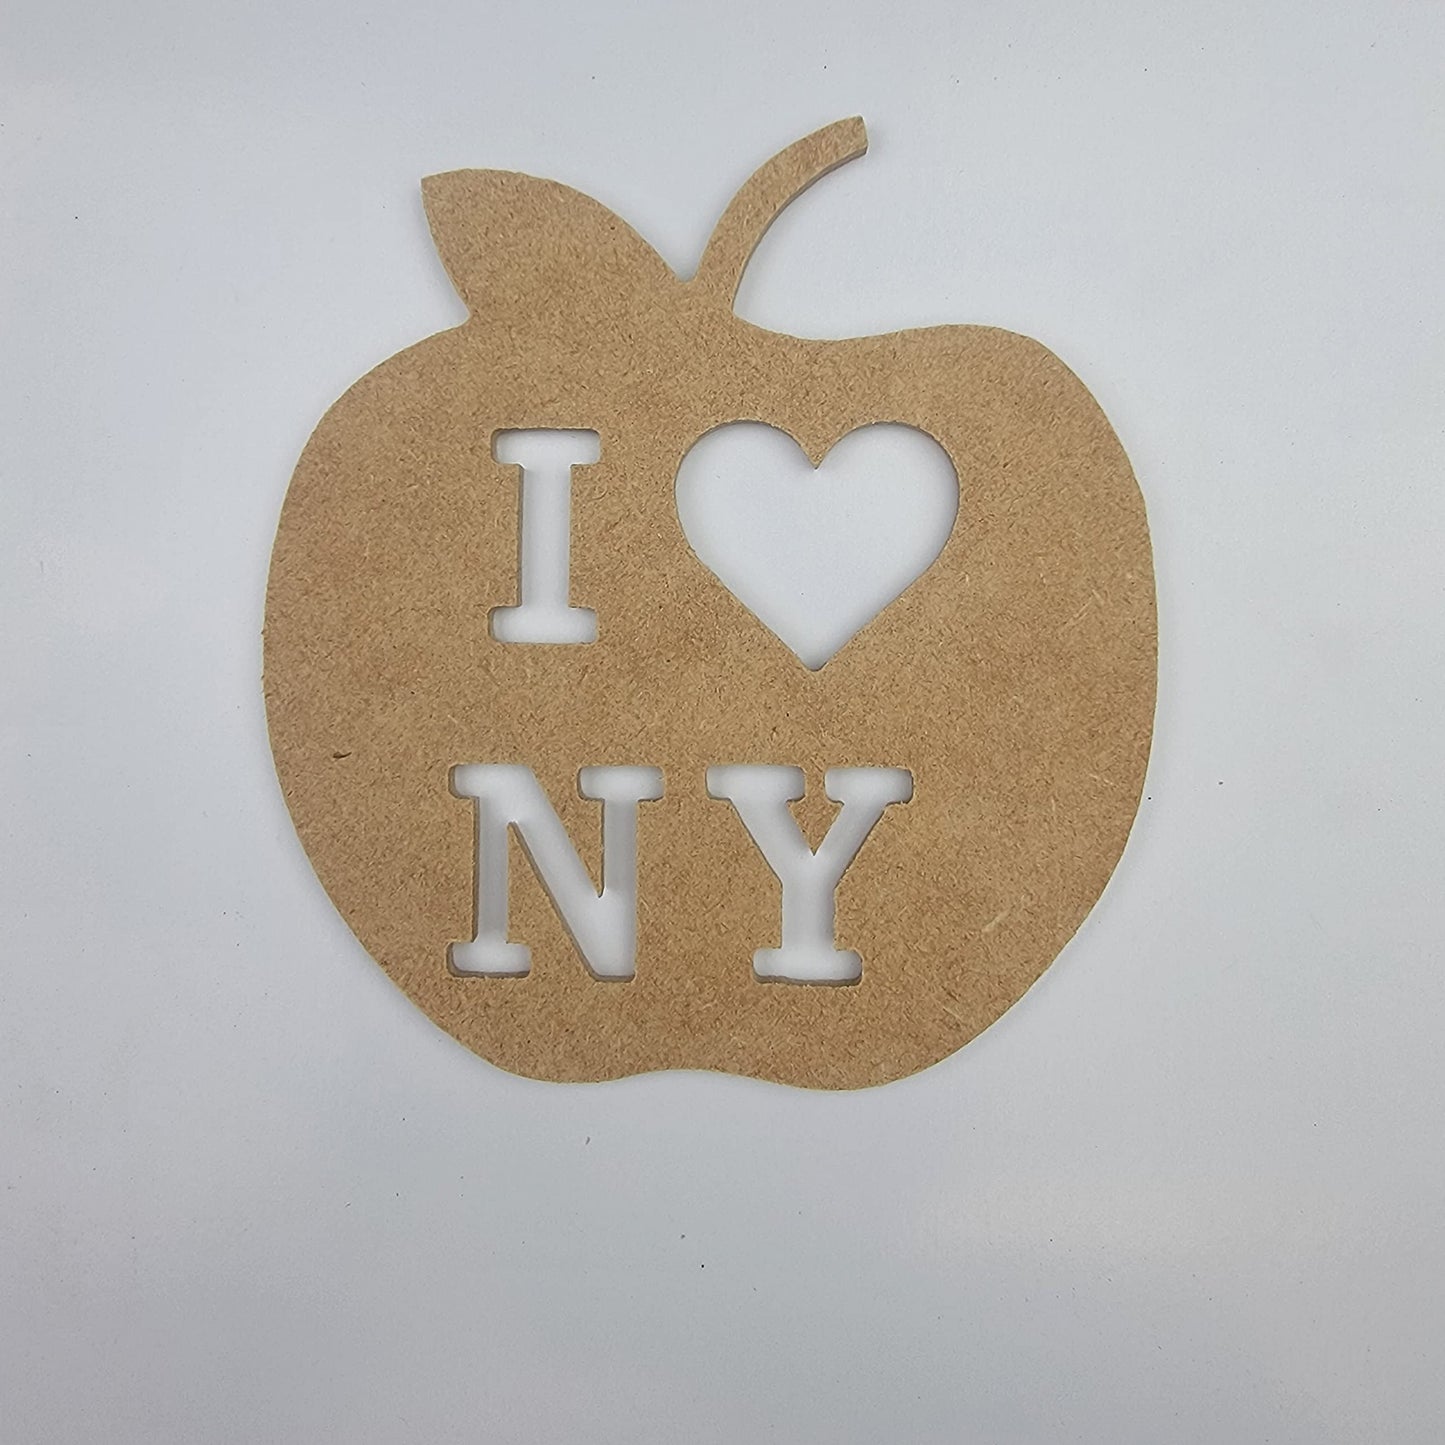 8" Love New York Apple, Unfinished MDF Art Shape by Wooden Craft Cutouts